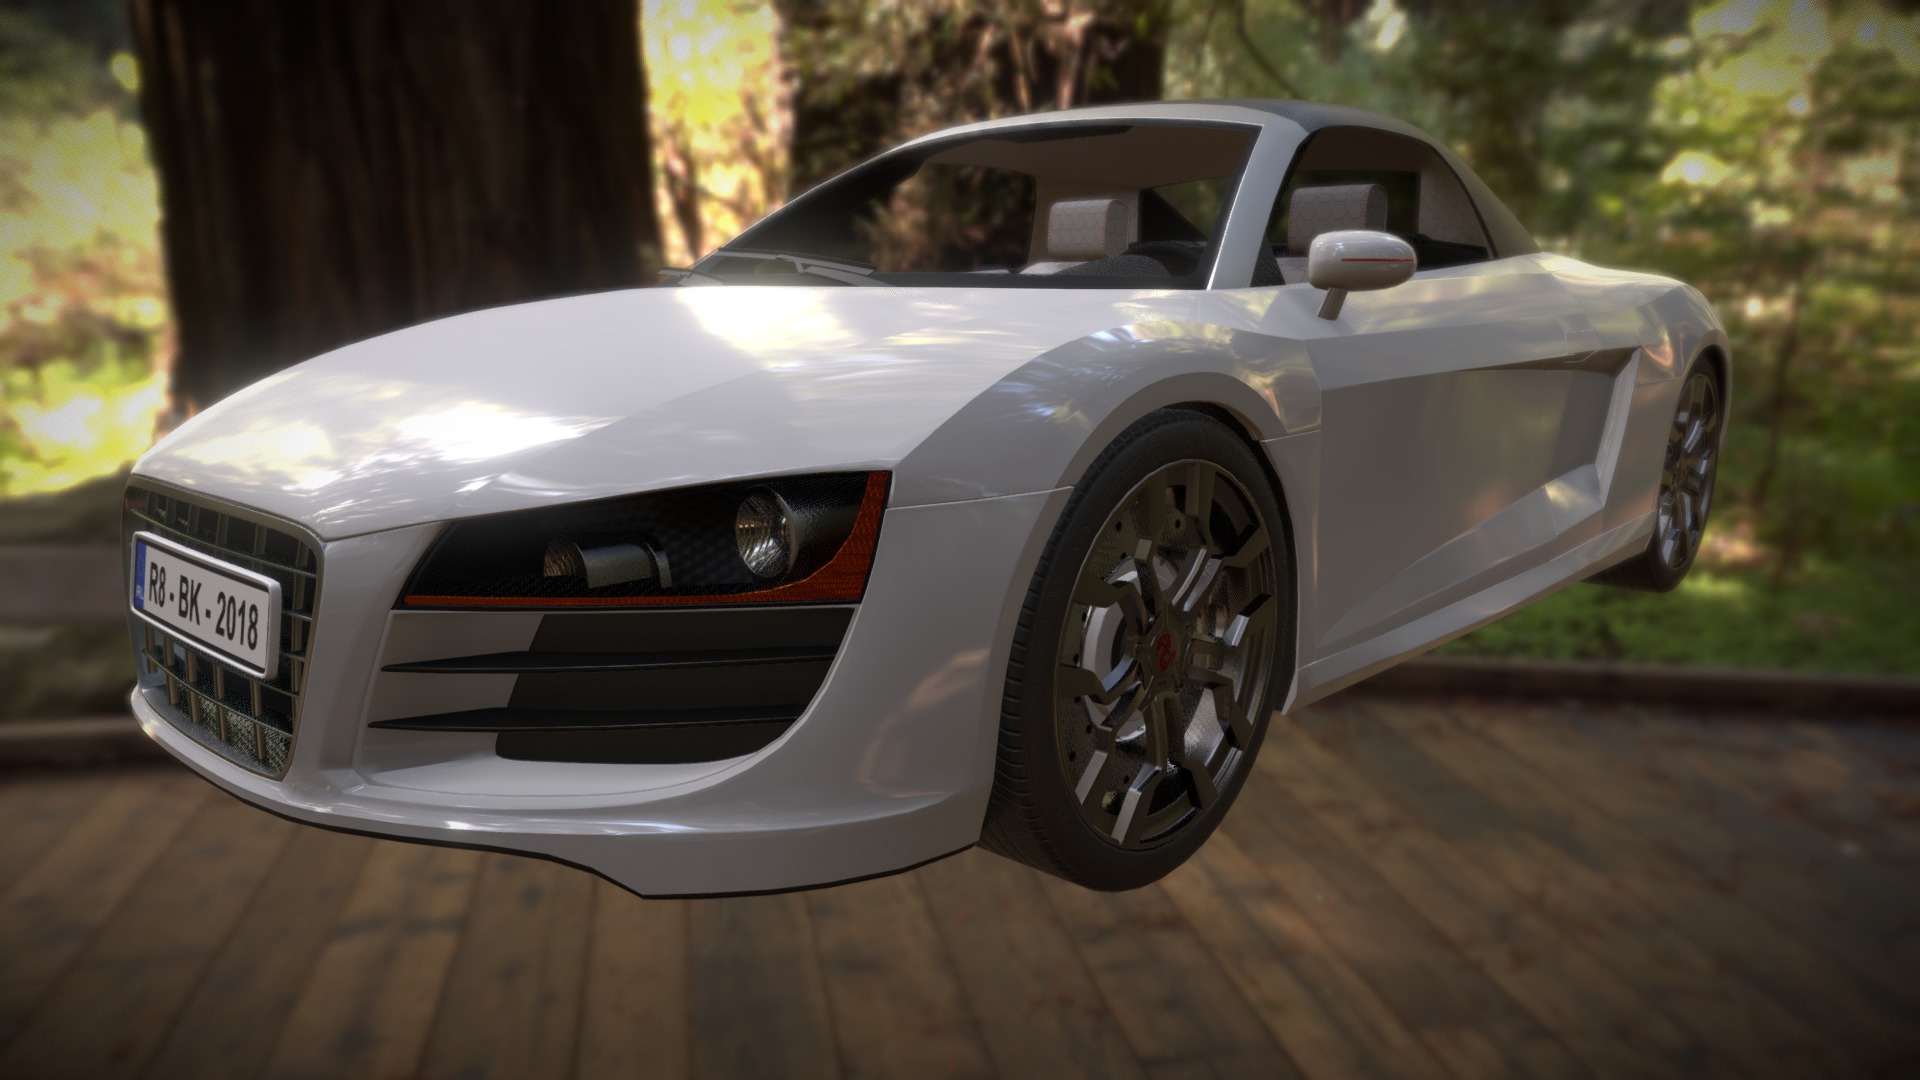 3D model HD Convertible Coupe - This is a 3D model of the HD Convertible Coupe. The 3D model is about a white sports car.